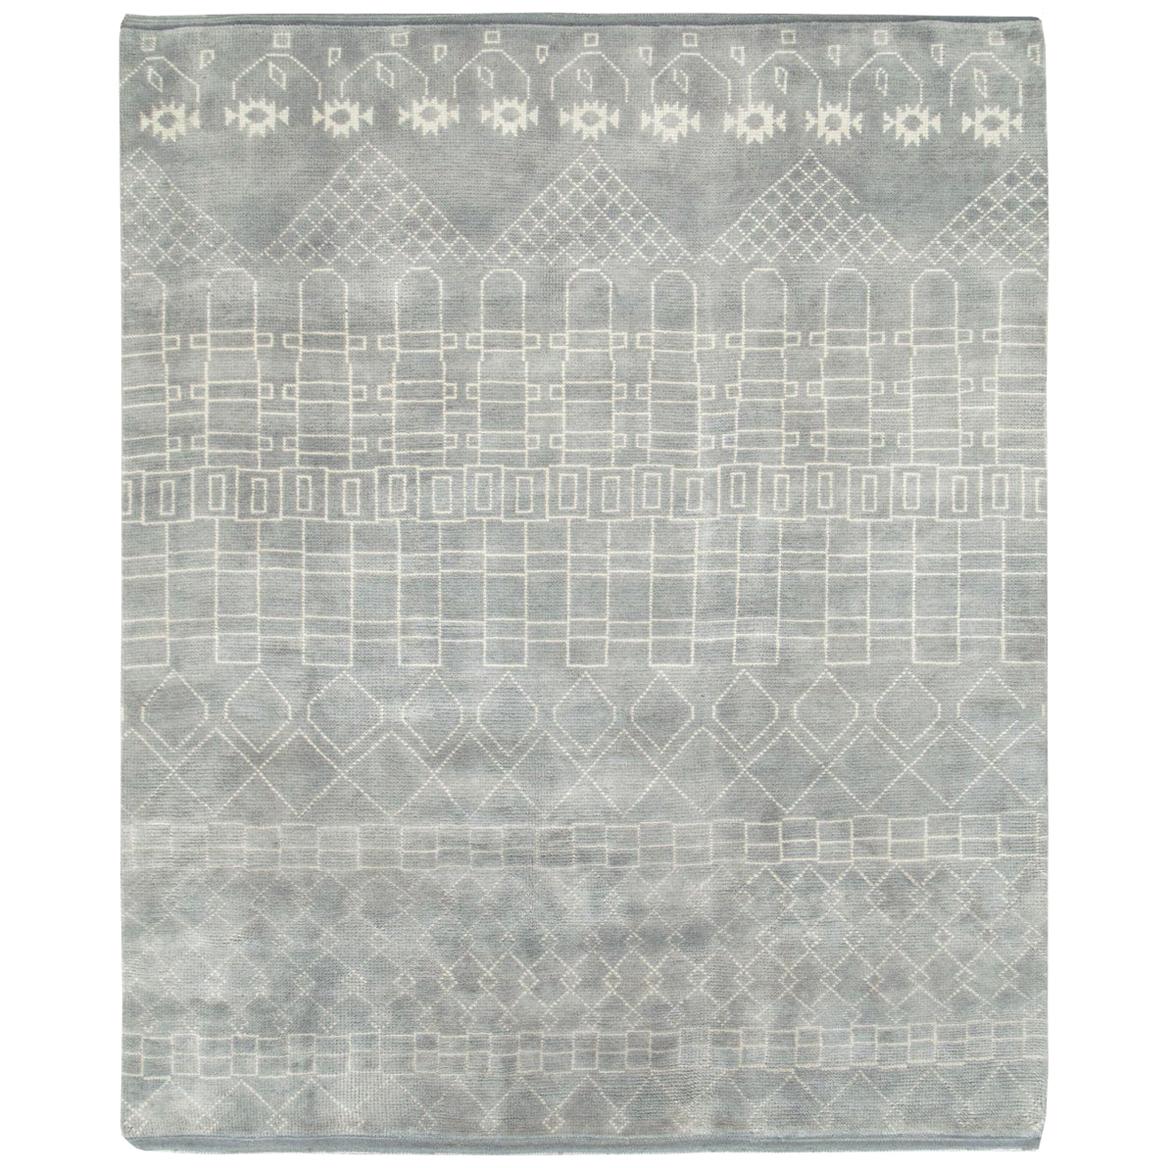 Contemporary Handmade Moroccan Room Size Carpet in Grey and White